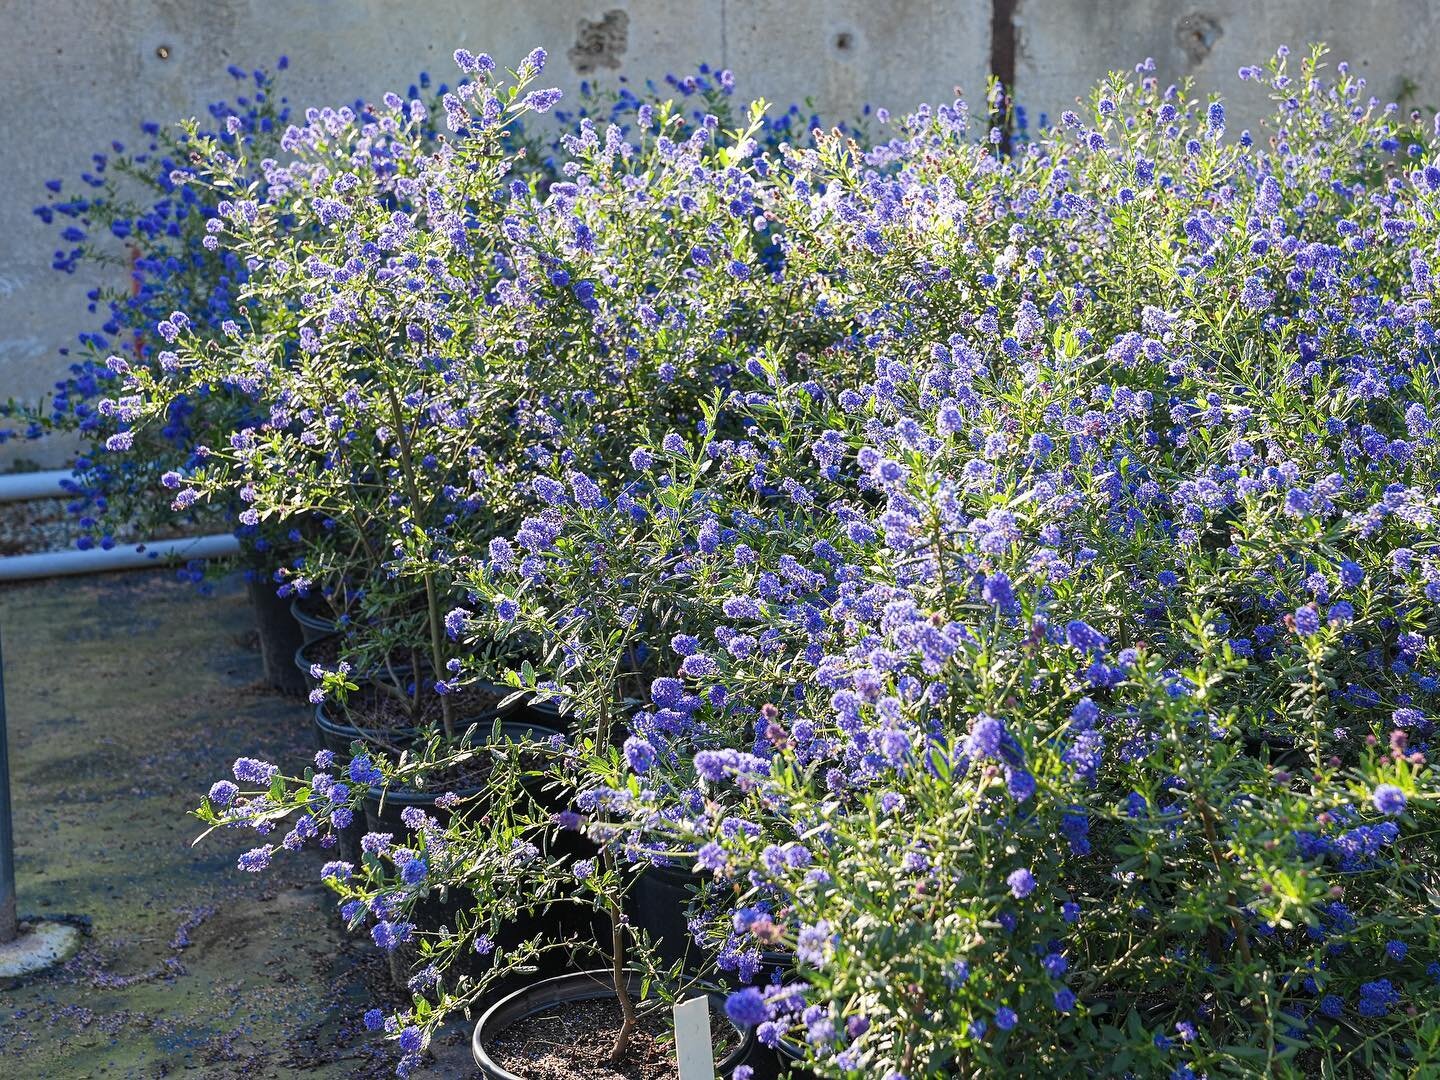 Do the hills seem bluer than usual?

Shout out to our native Ceanothus (aka California Lilac) for having an exceptionally floriferous year! They are in full bloom here at the nursery and in the wild. Get outside and take a hike to view them in all th